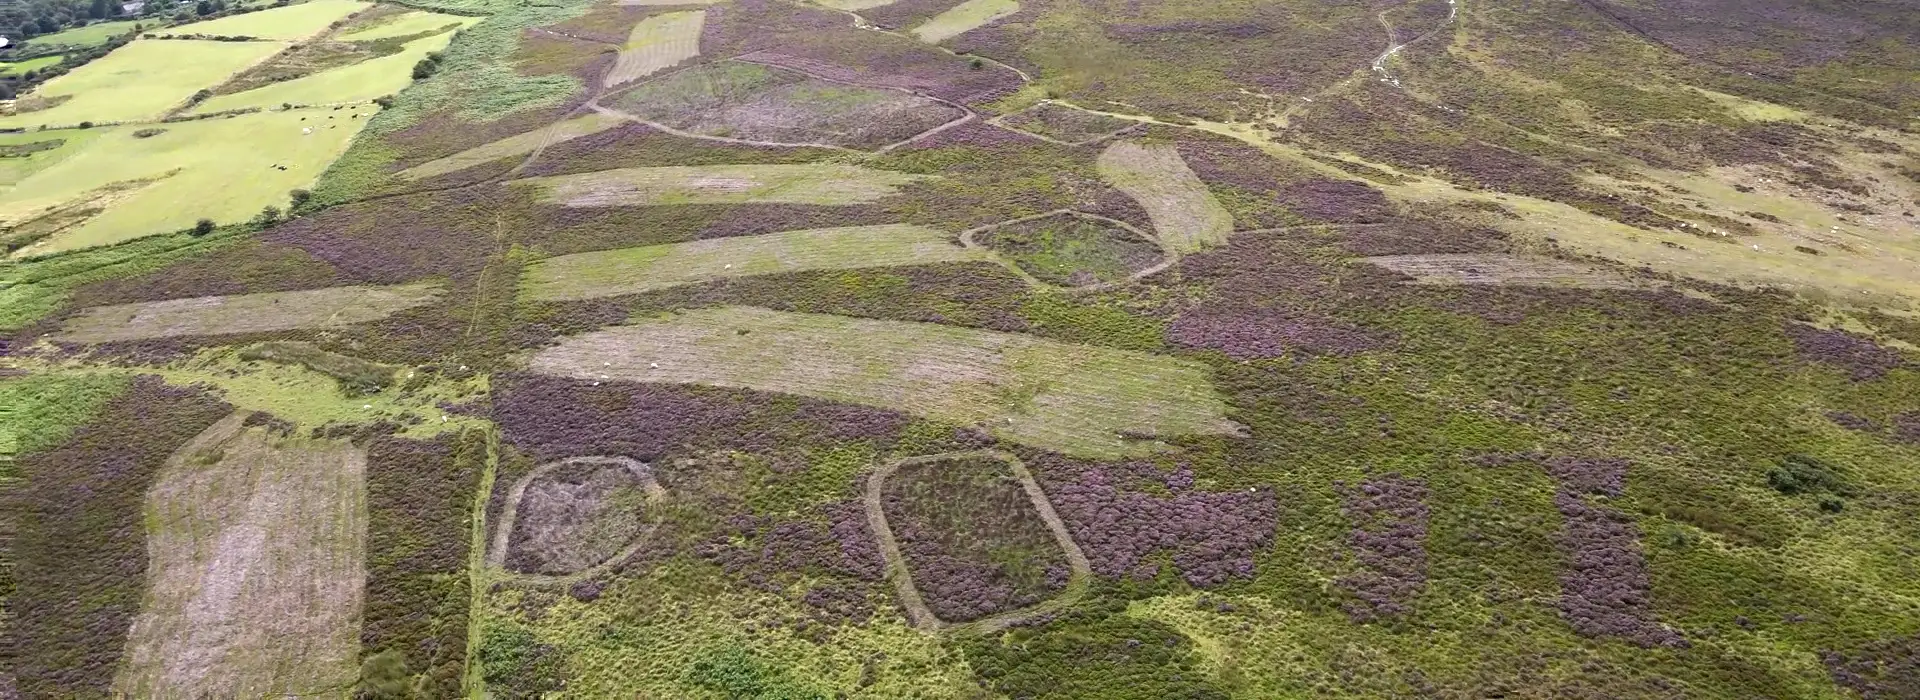 Ruabon Mountains aerial view of damaged moors